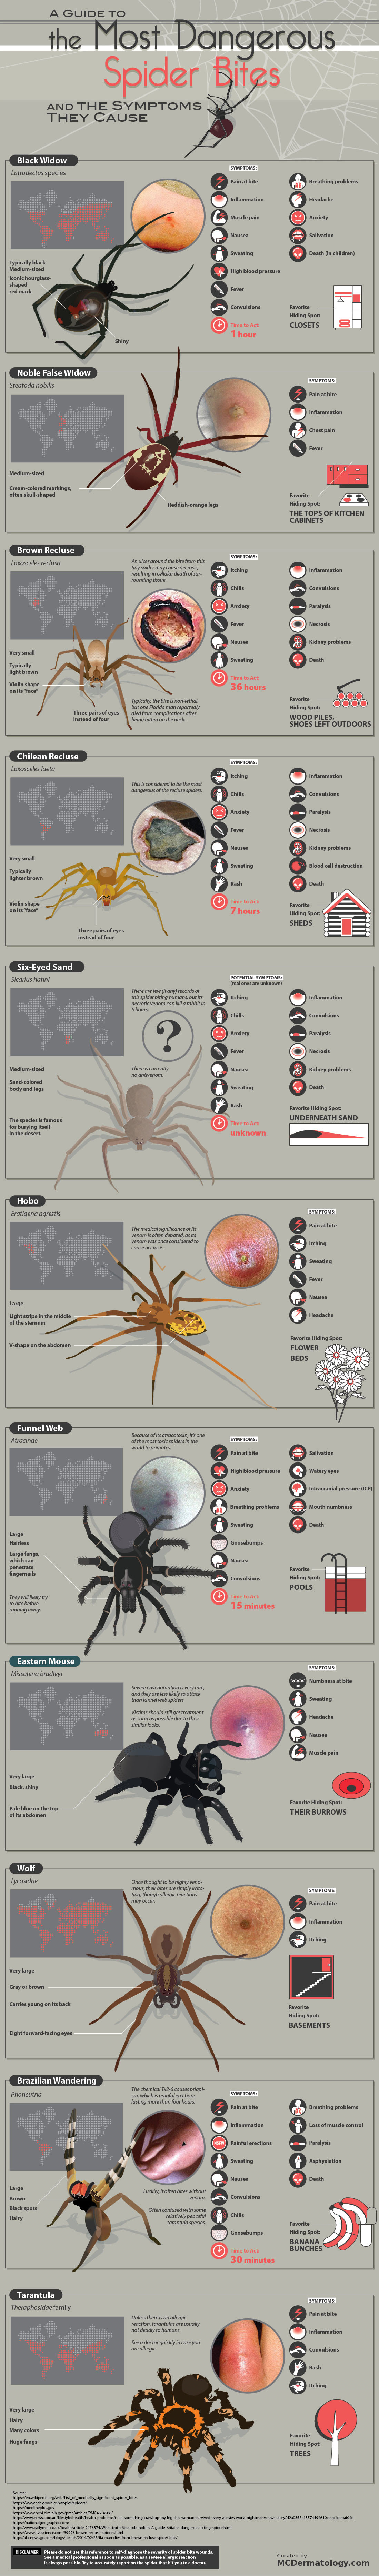 The Most Dangerous Spider Bites & Symptoms They Cause